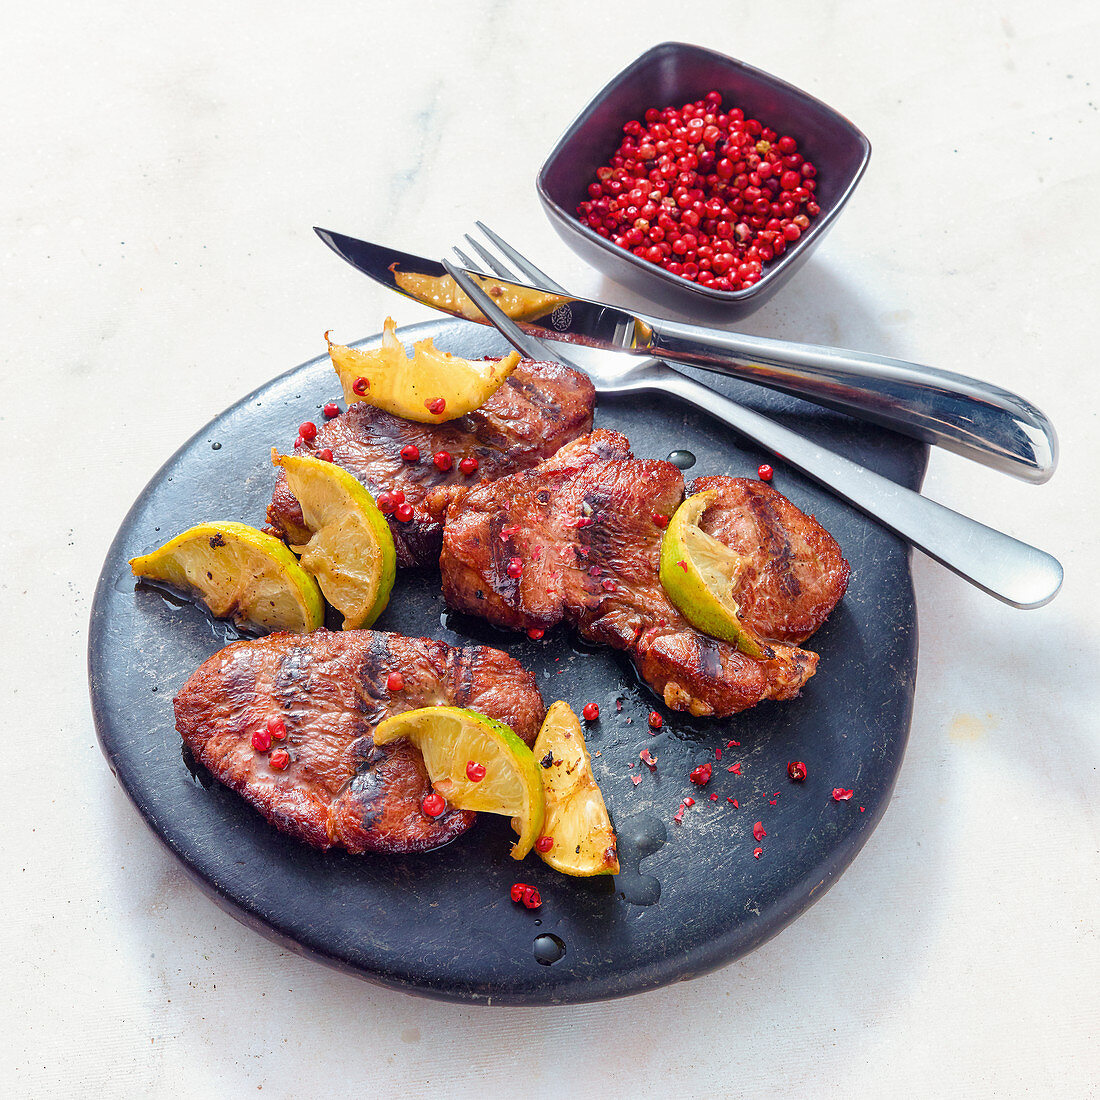 Grilled veal steaks with lime and red pepper